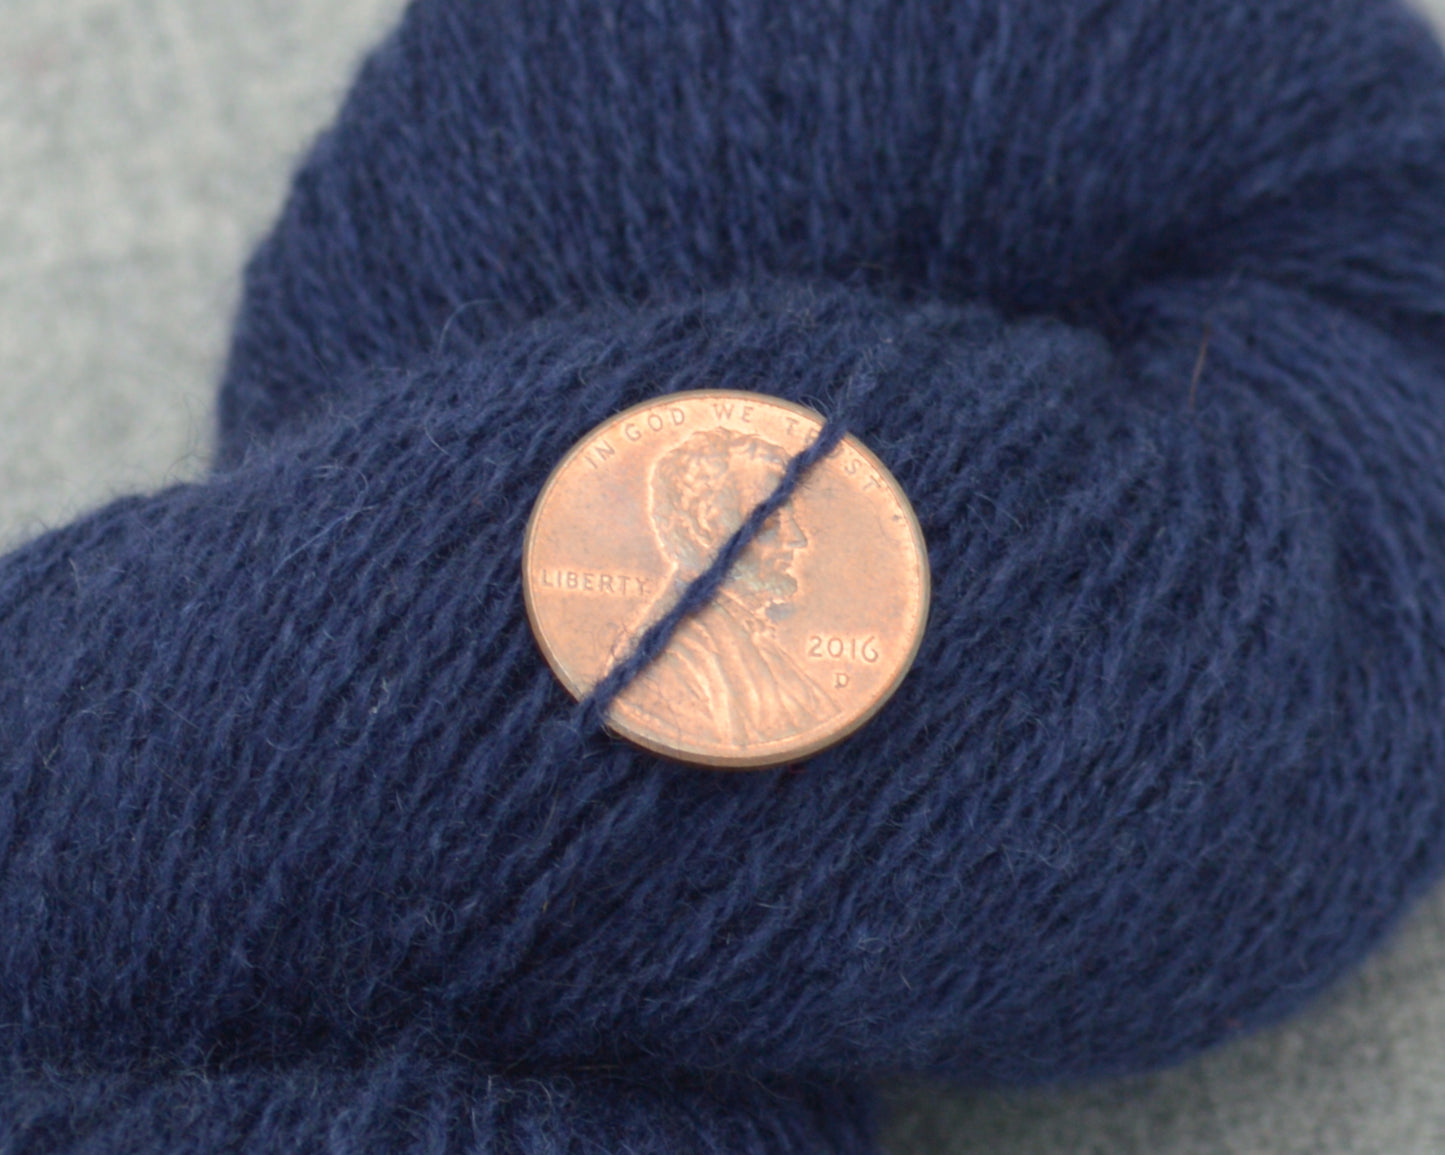 Lace Weight Recycled Cashmere Yarn in Navy Blue